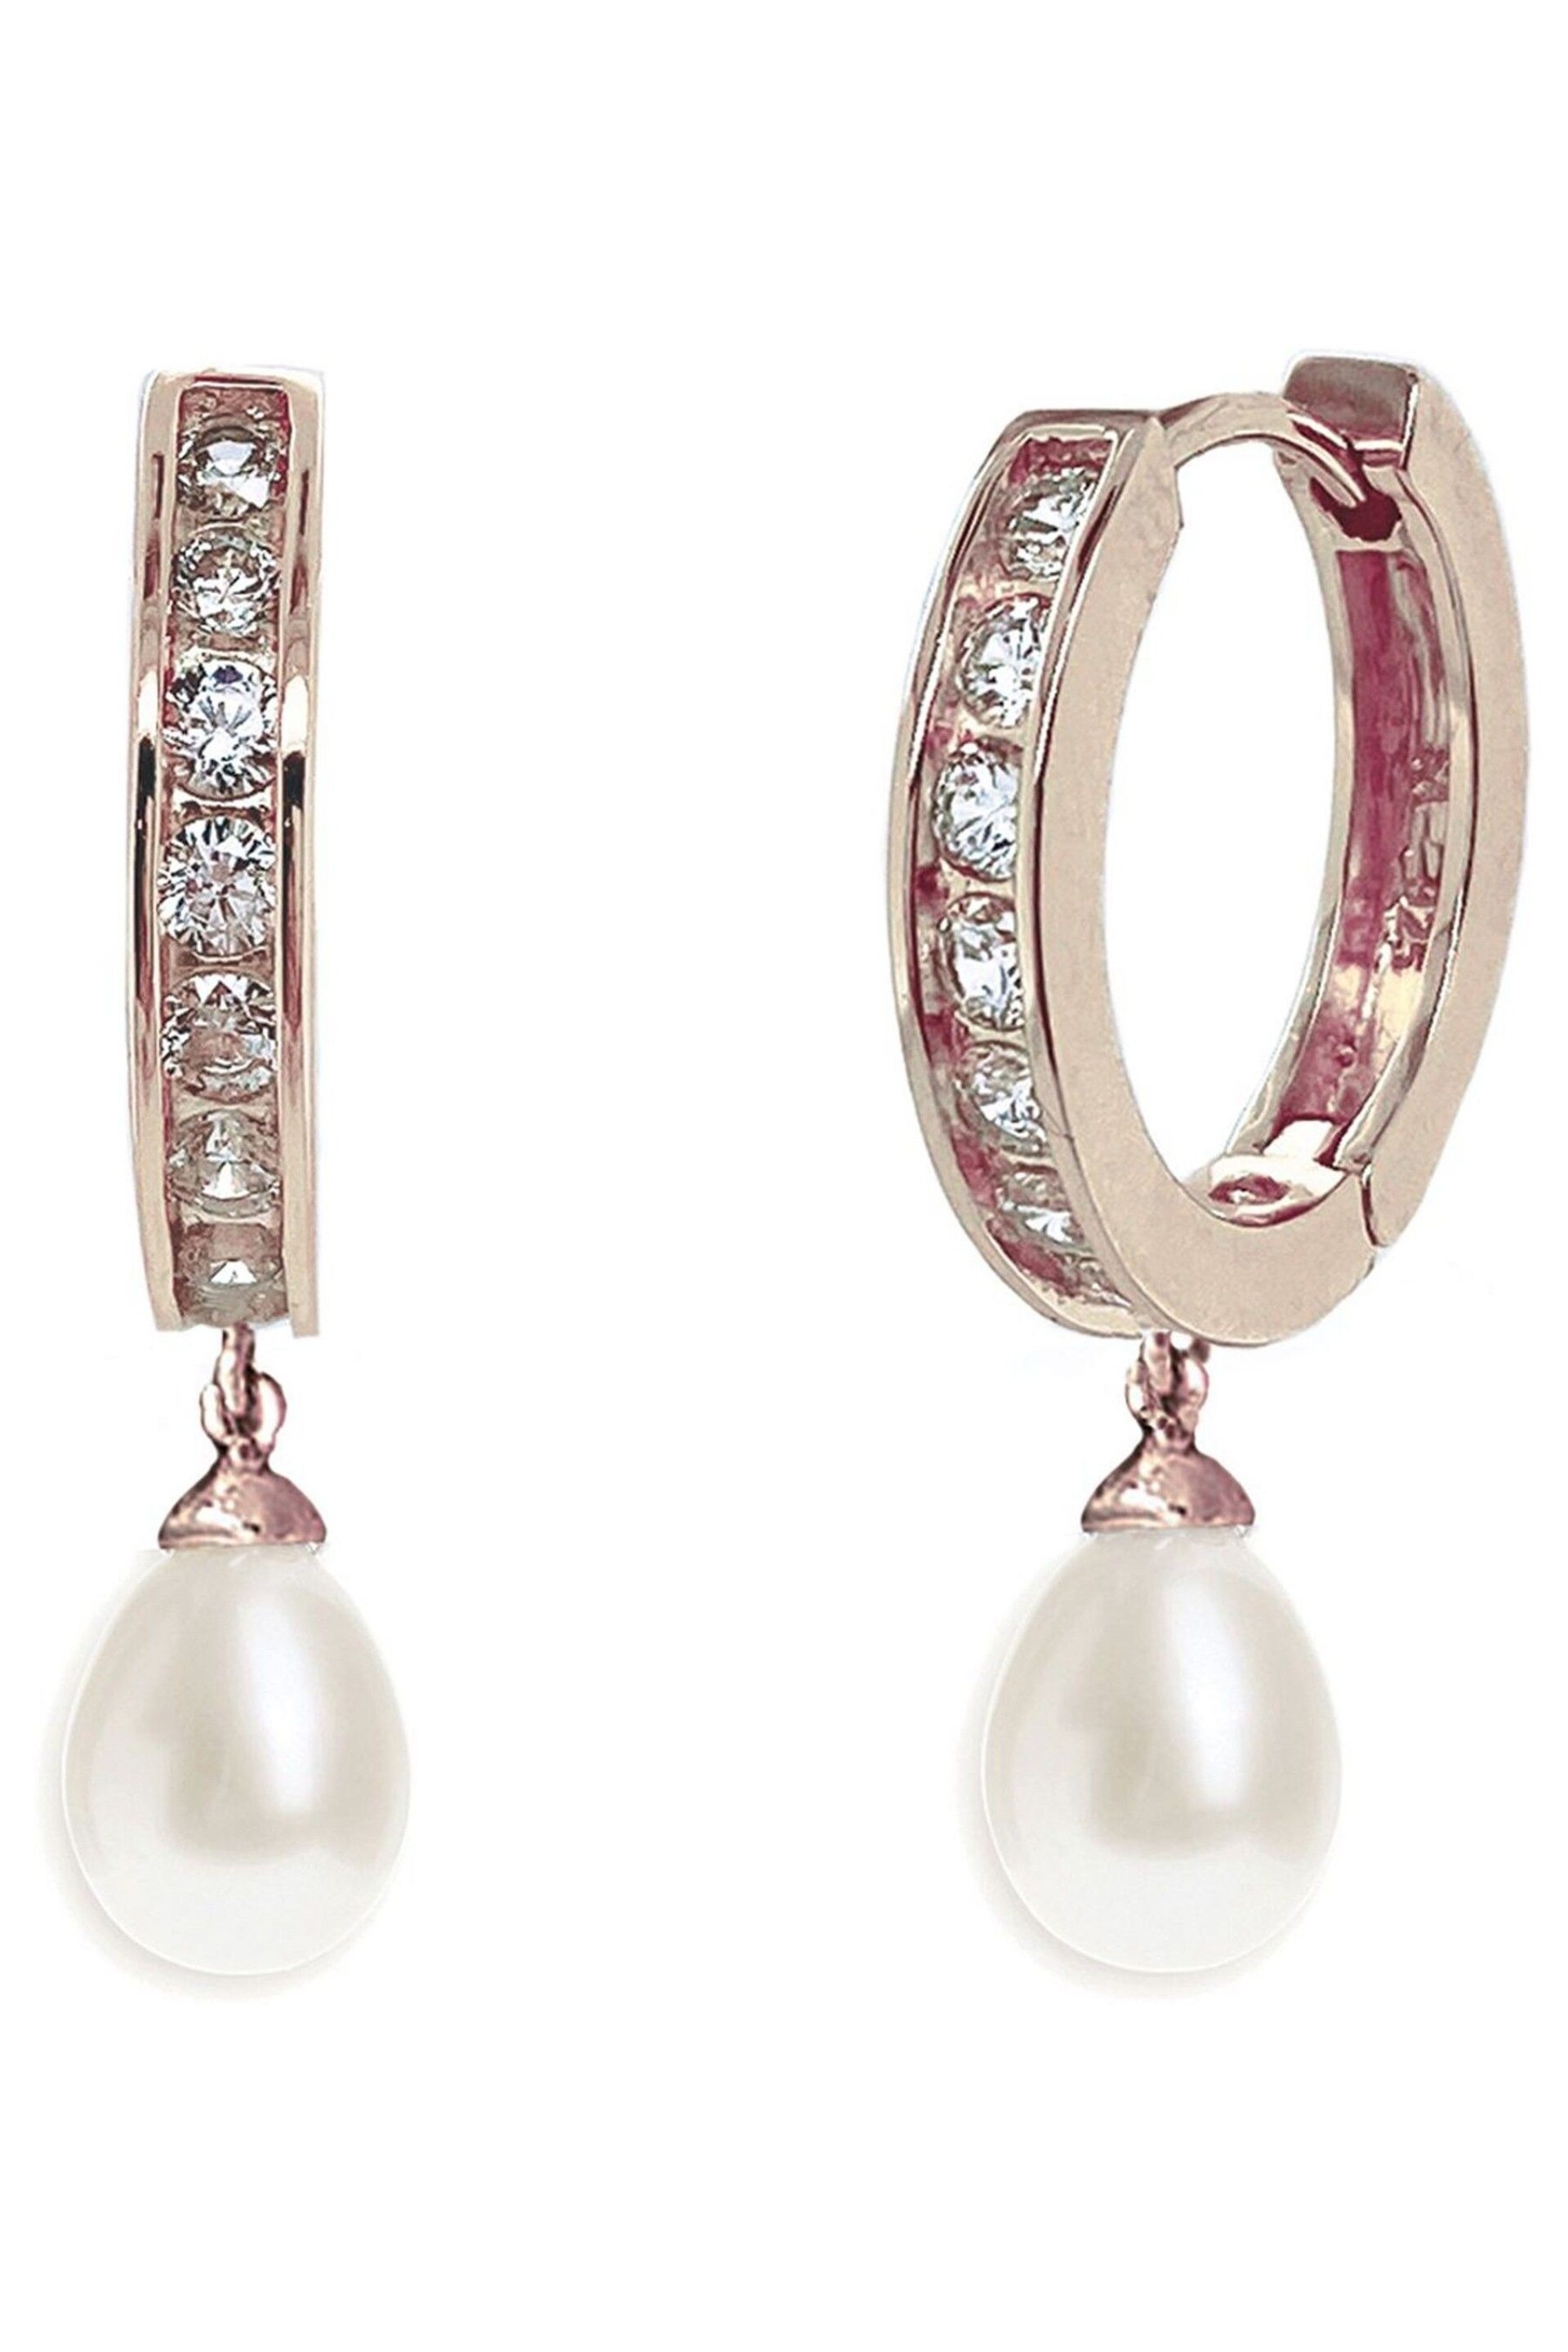 Ivory & Co Rose Gold Canterbury Crystal And Pearl Hoop Earrings - Image 1 of 5